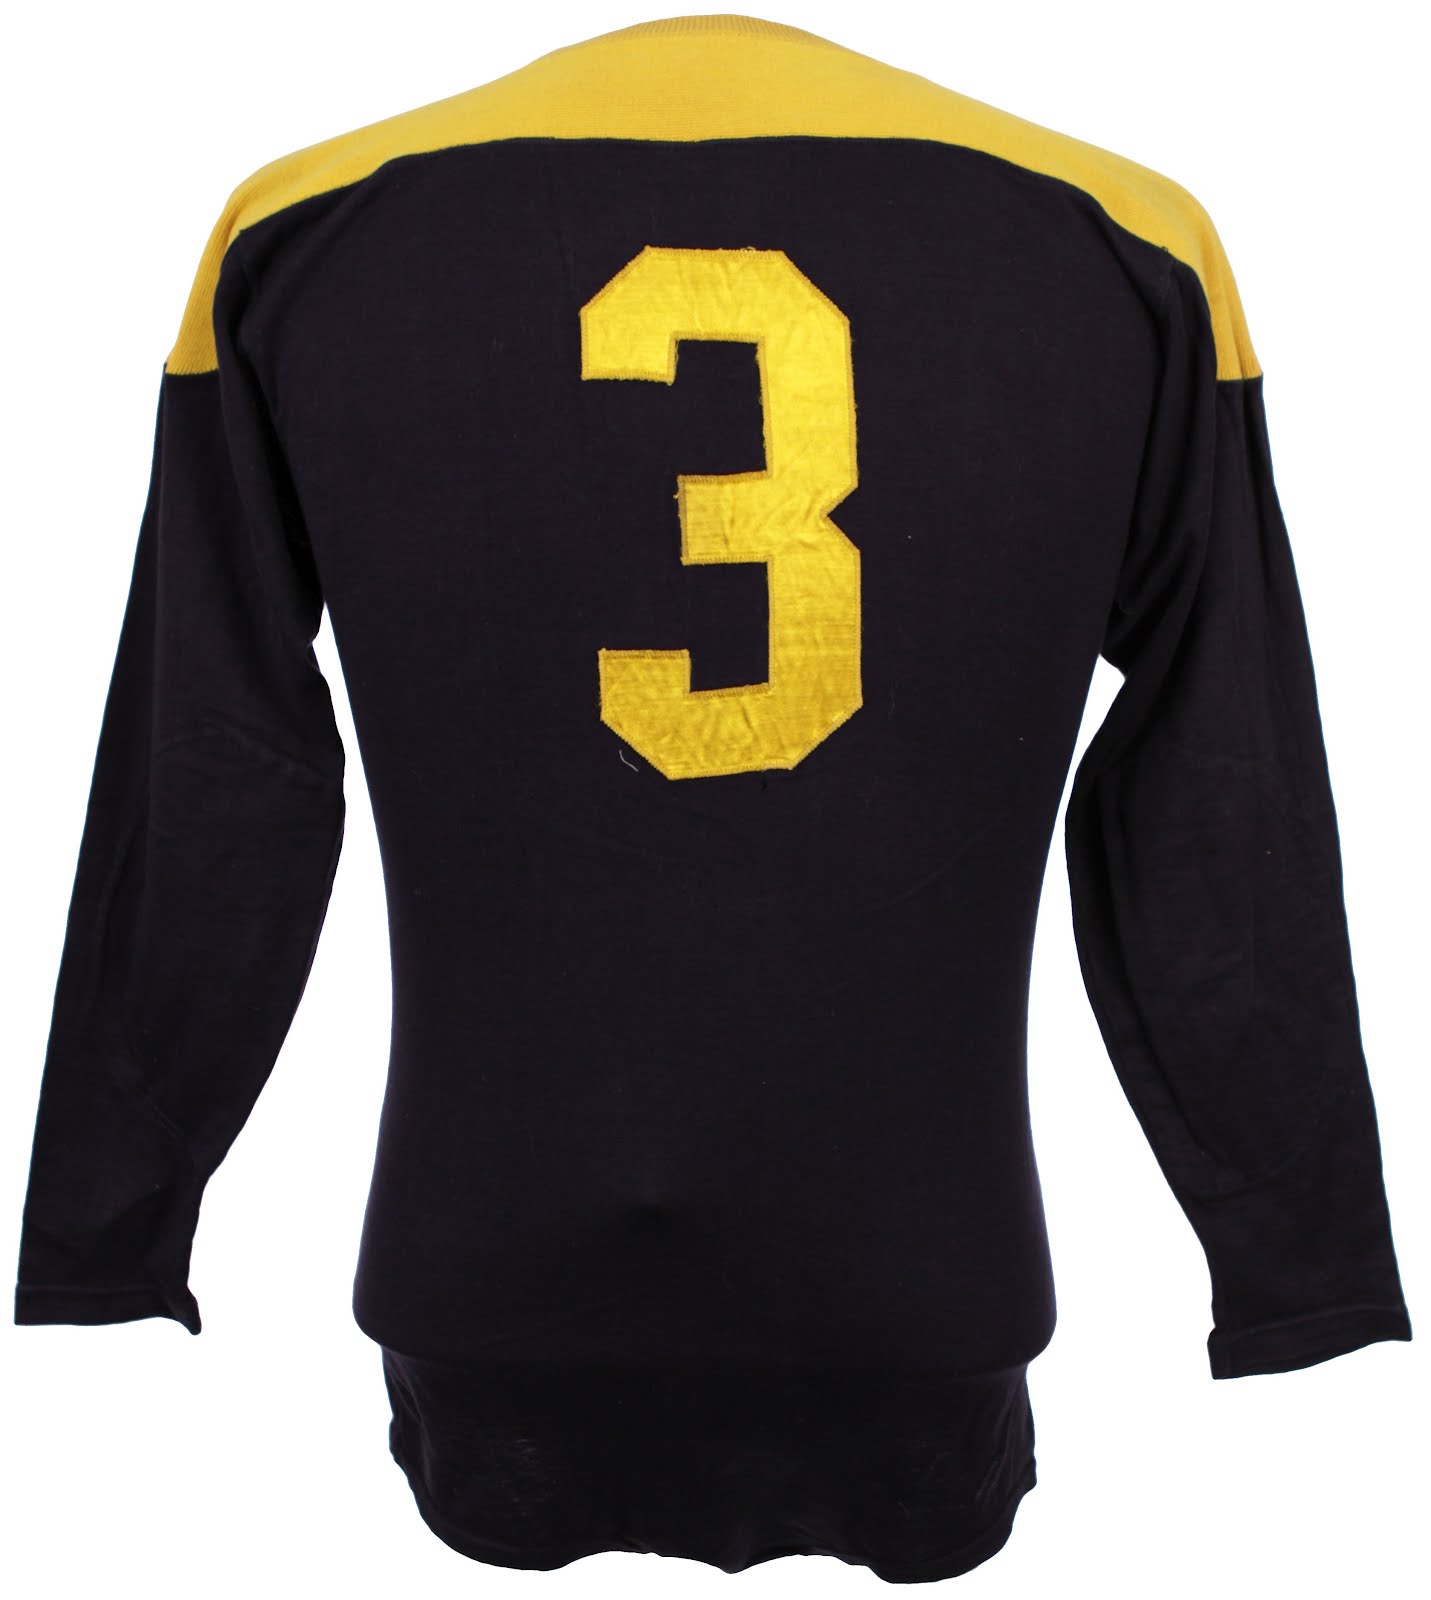 curly lambeau jersey number